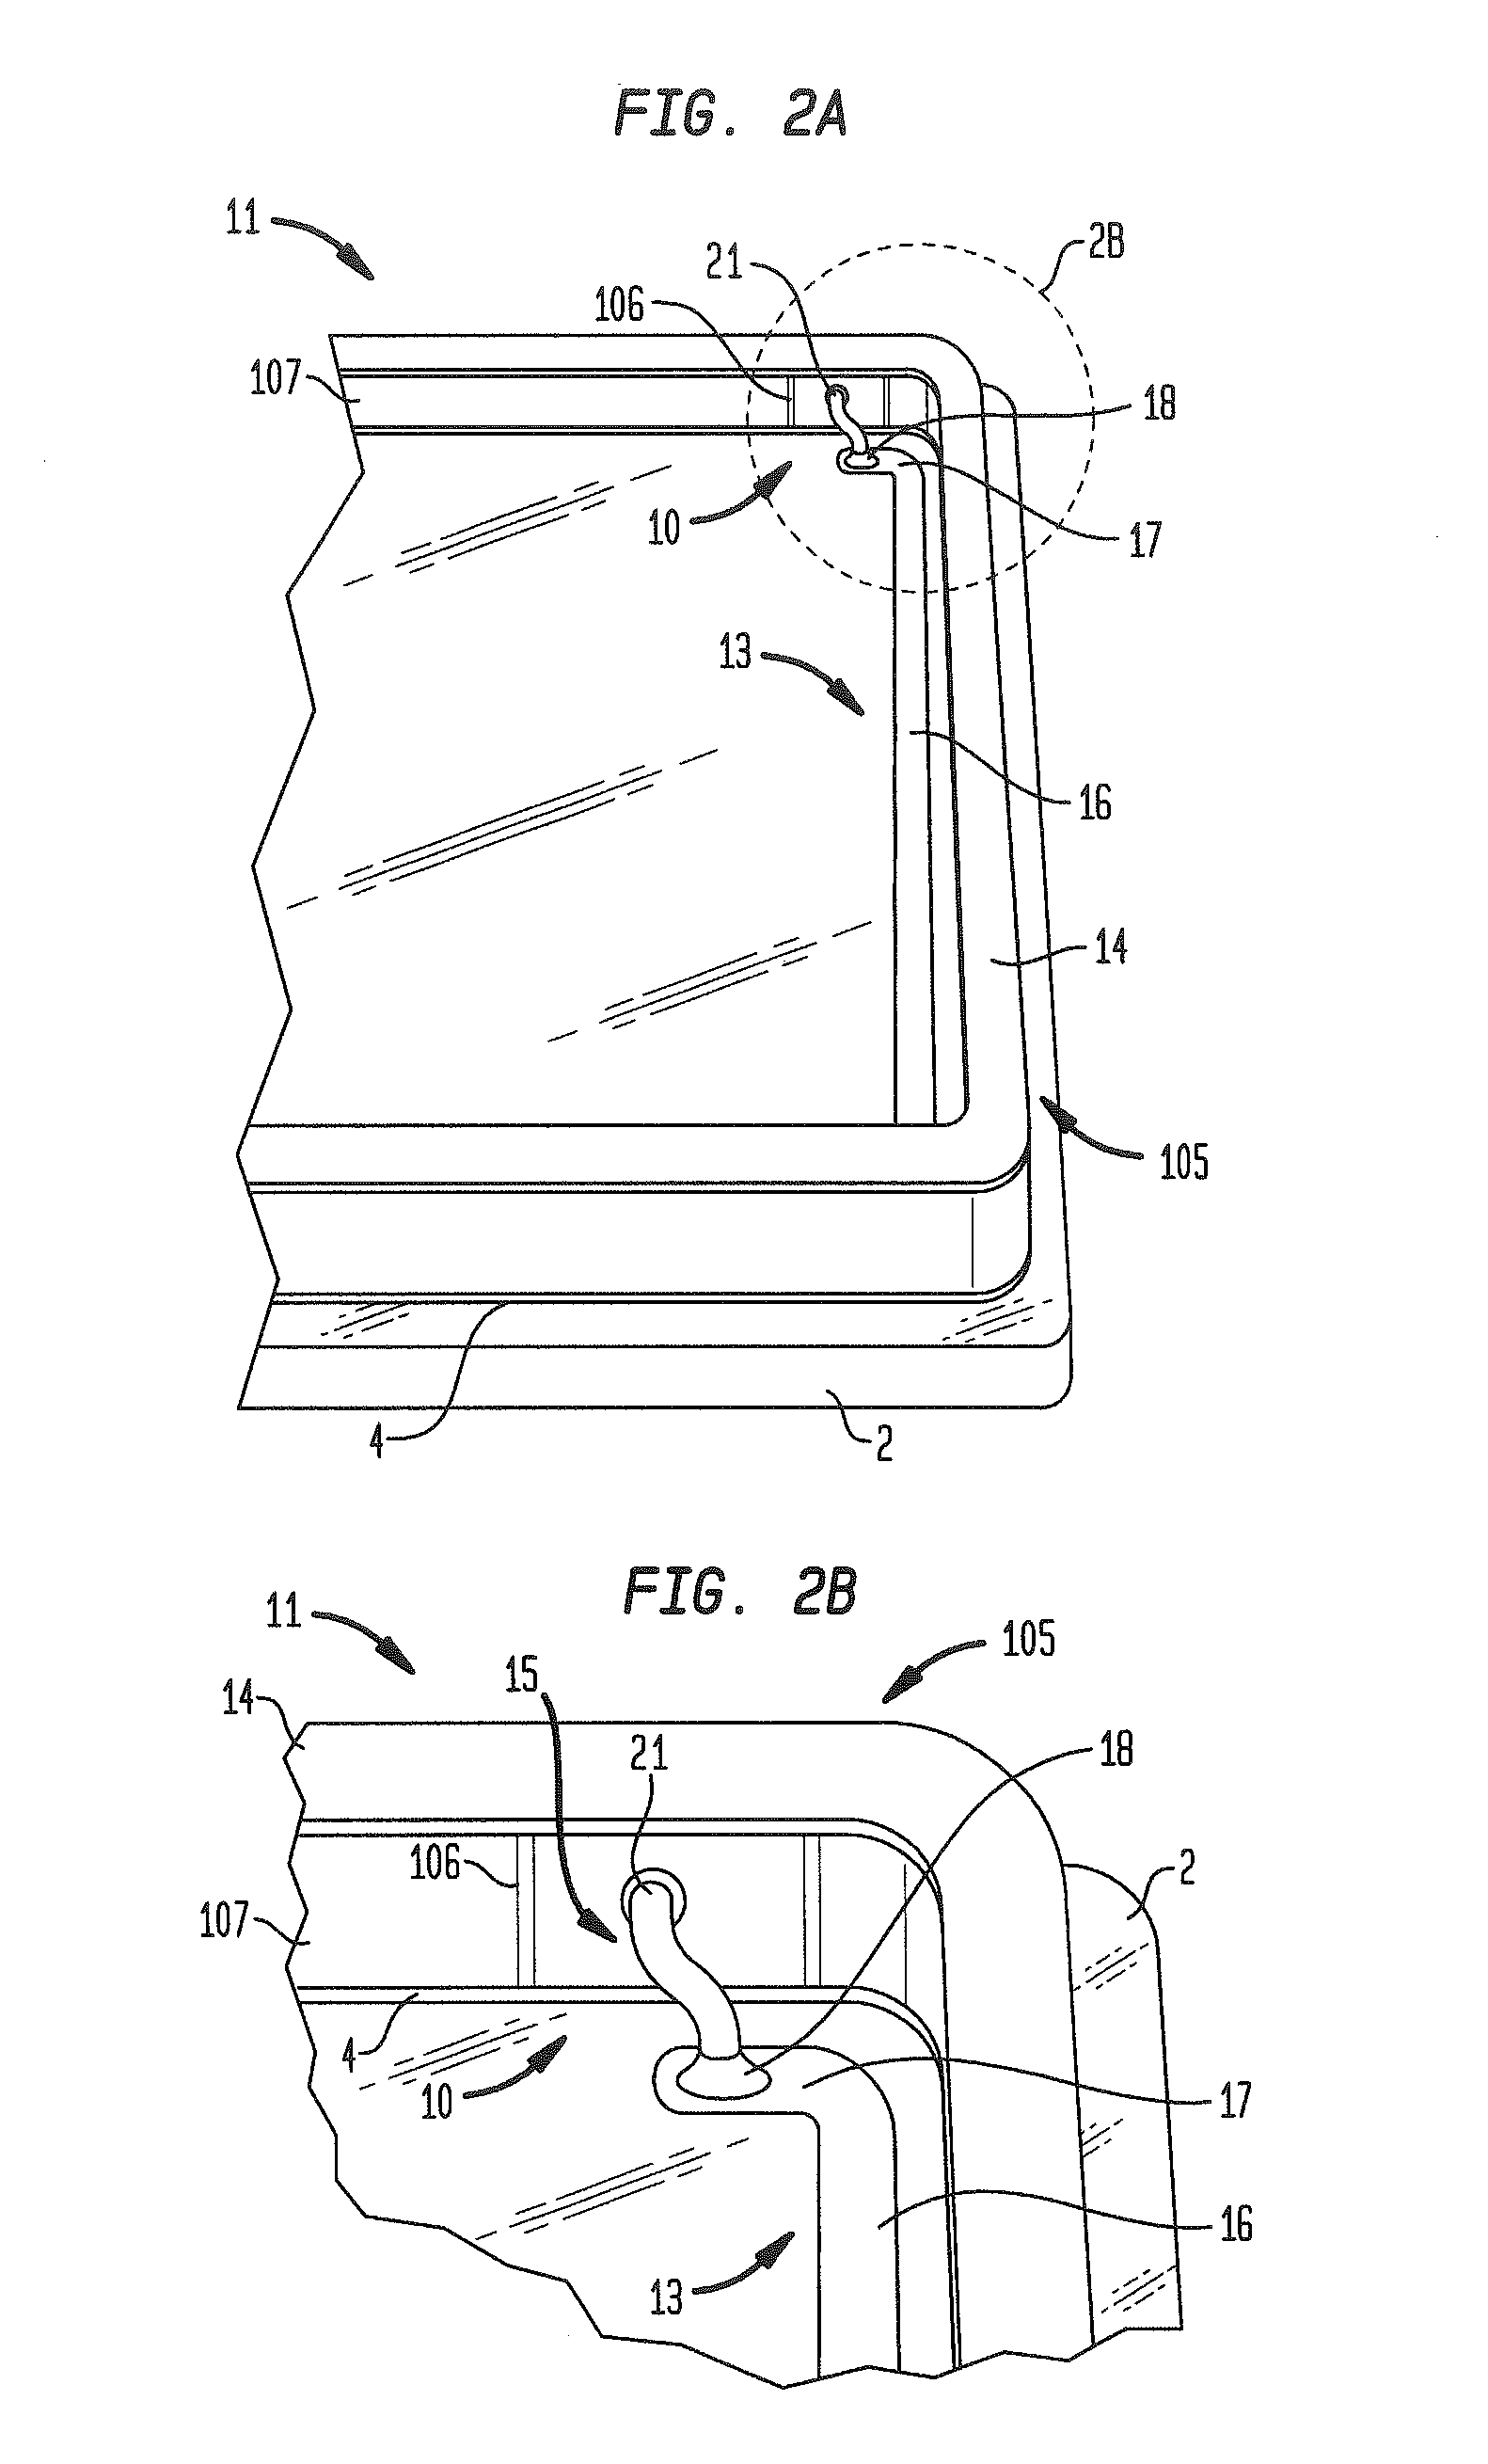 Electrical feed-through spacer and connectivity